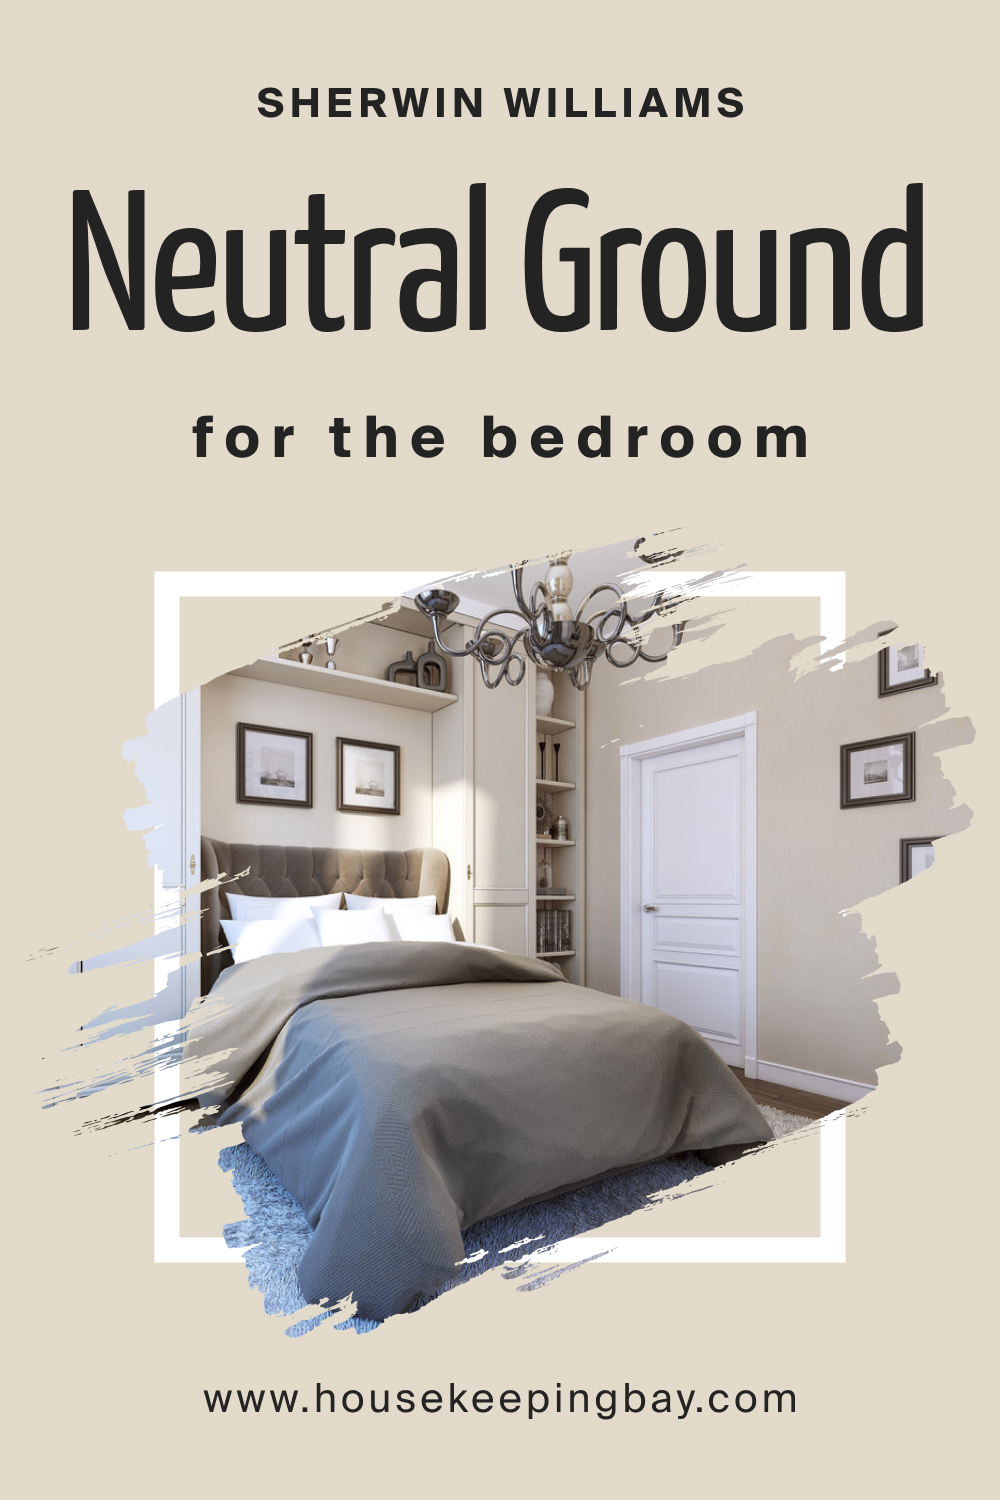 Sherwin Williams. Neutral Ground For the bedroom